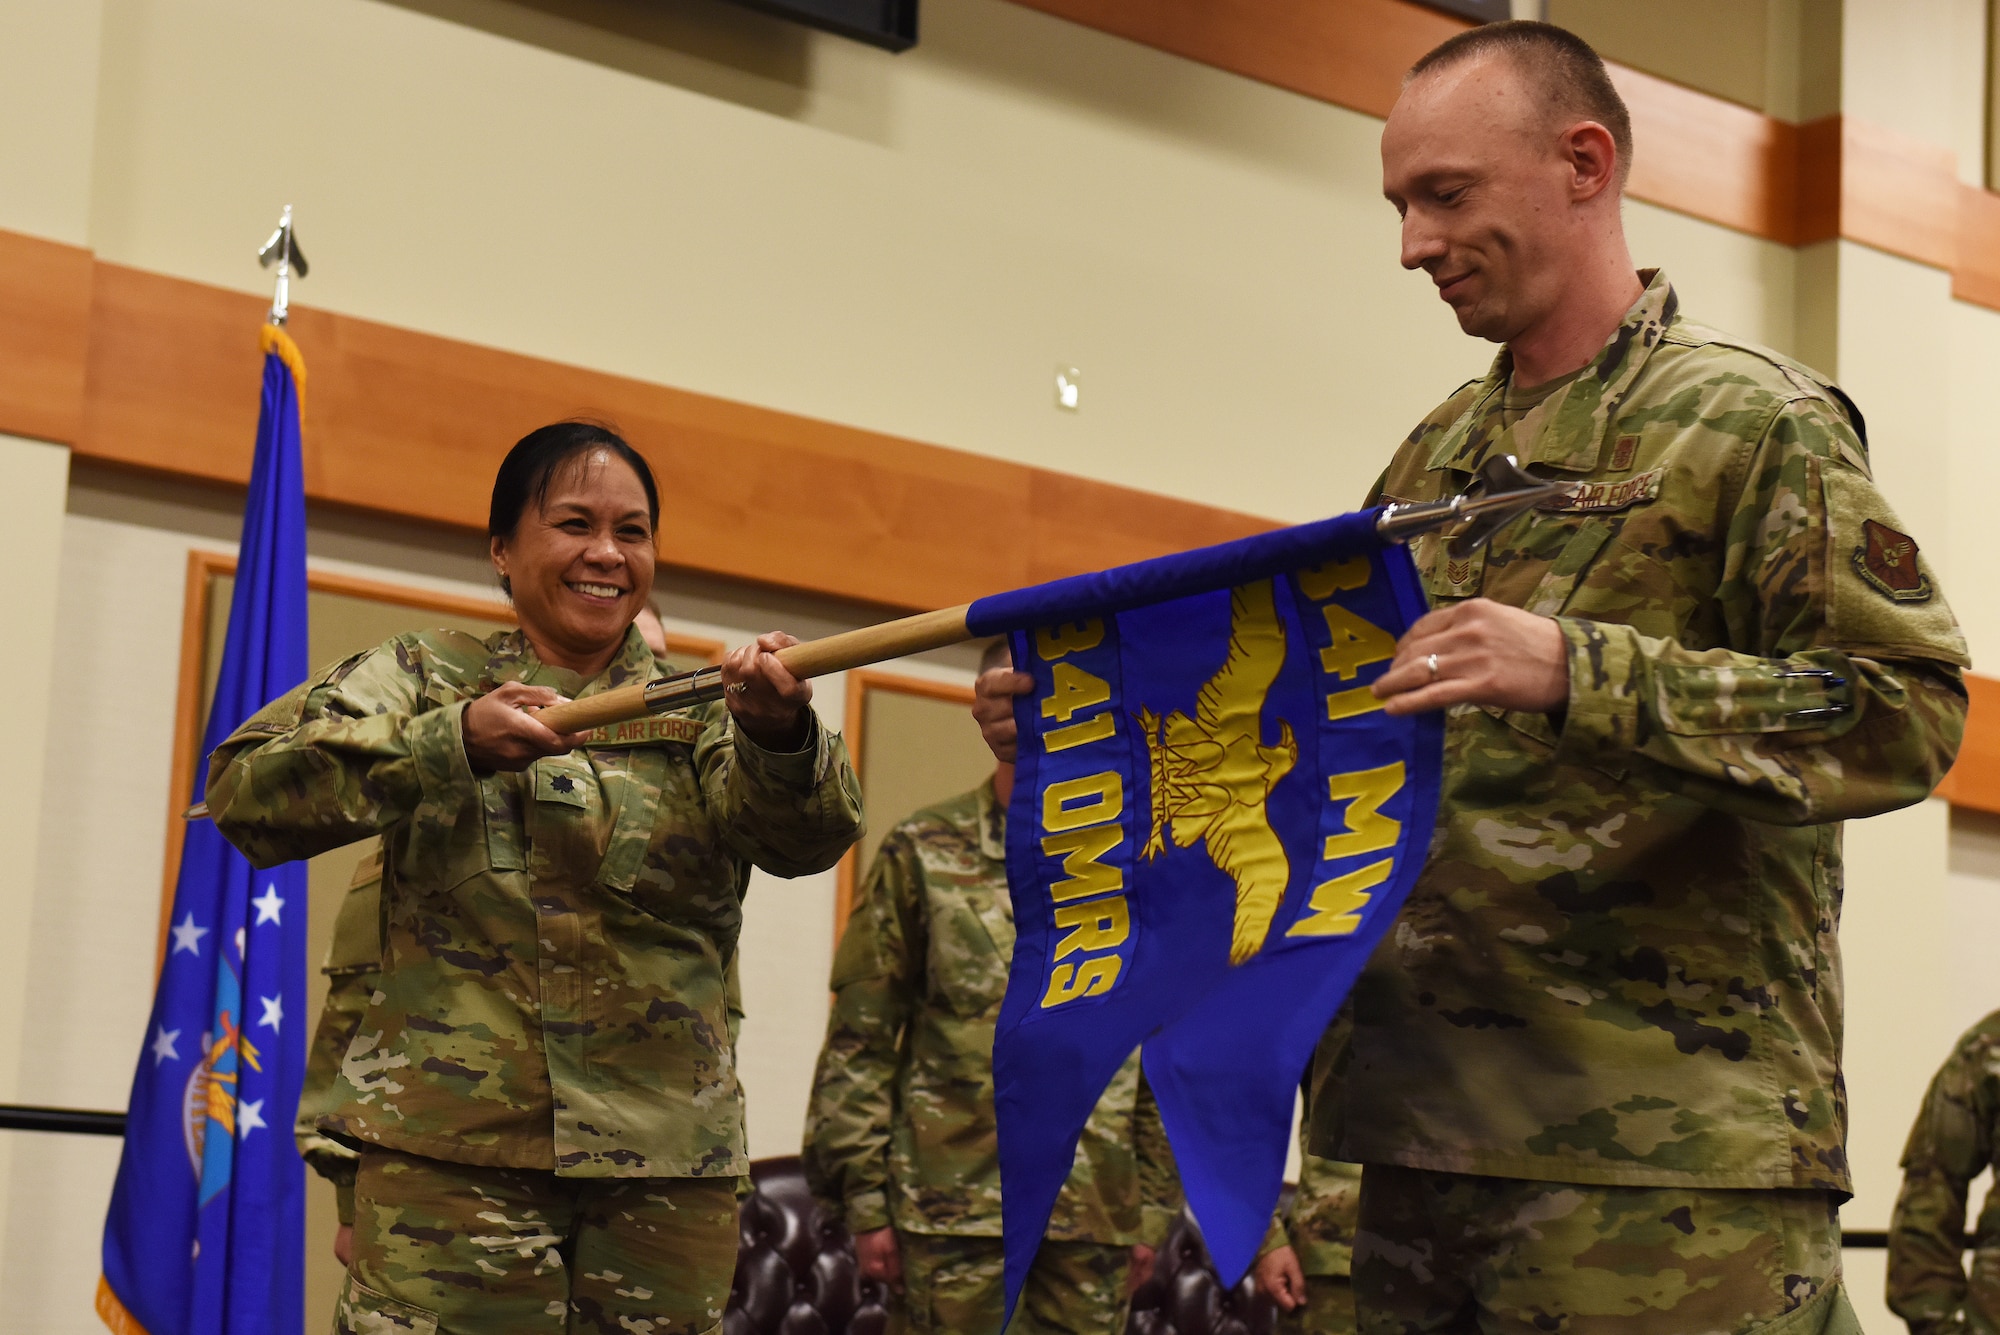 Lt. Col. Michelle Dimoff, 341st Operational Medical Readiness Squadron commander, left, and Master Sergeant Derrick Rutherford, 341st OMRS superintendent, unfurl the OMRS guidon August 16, 2019, at the Grizzly Bend on Malmstrom Air Force Base, Mont.